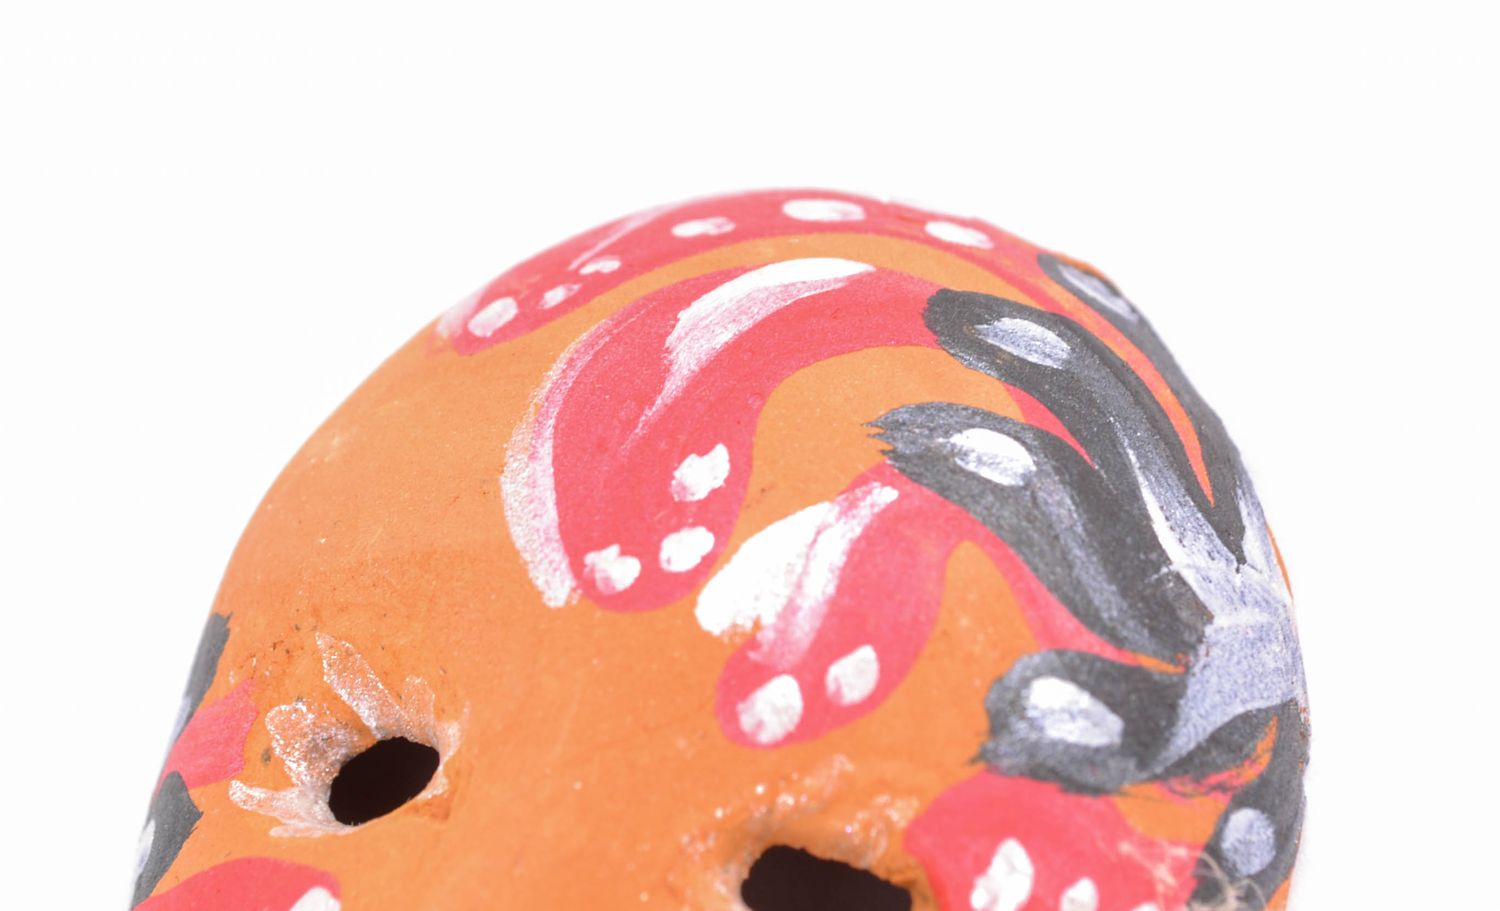 Painted clay interior pendant carnival mask photo 3